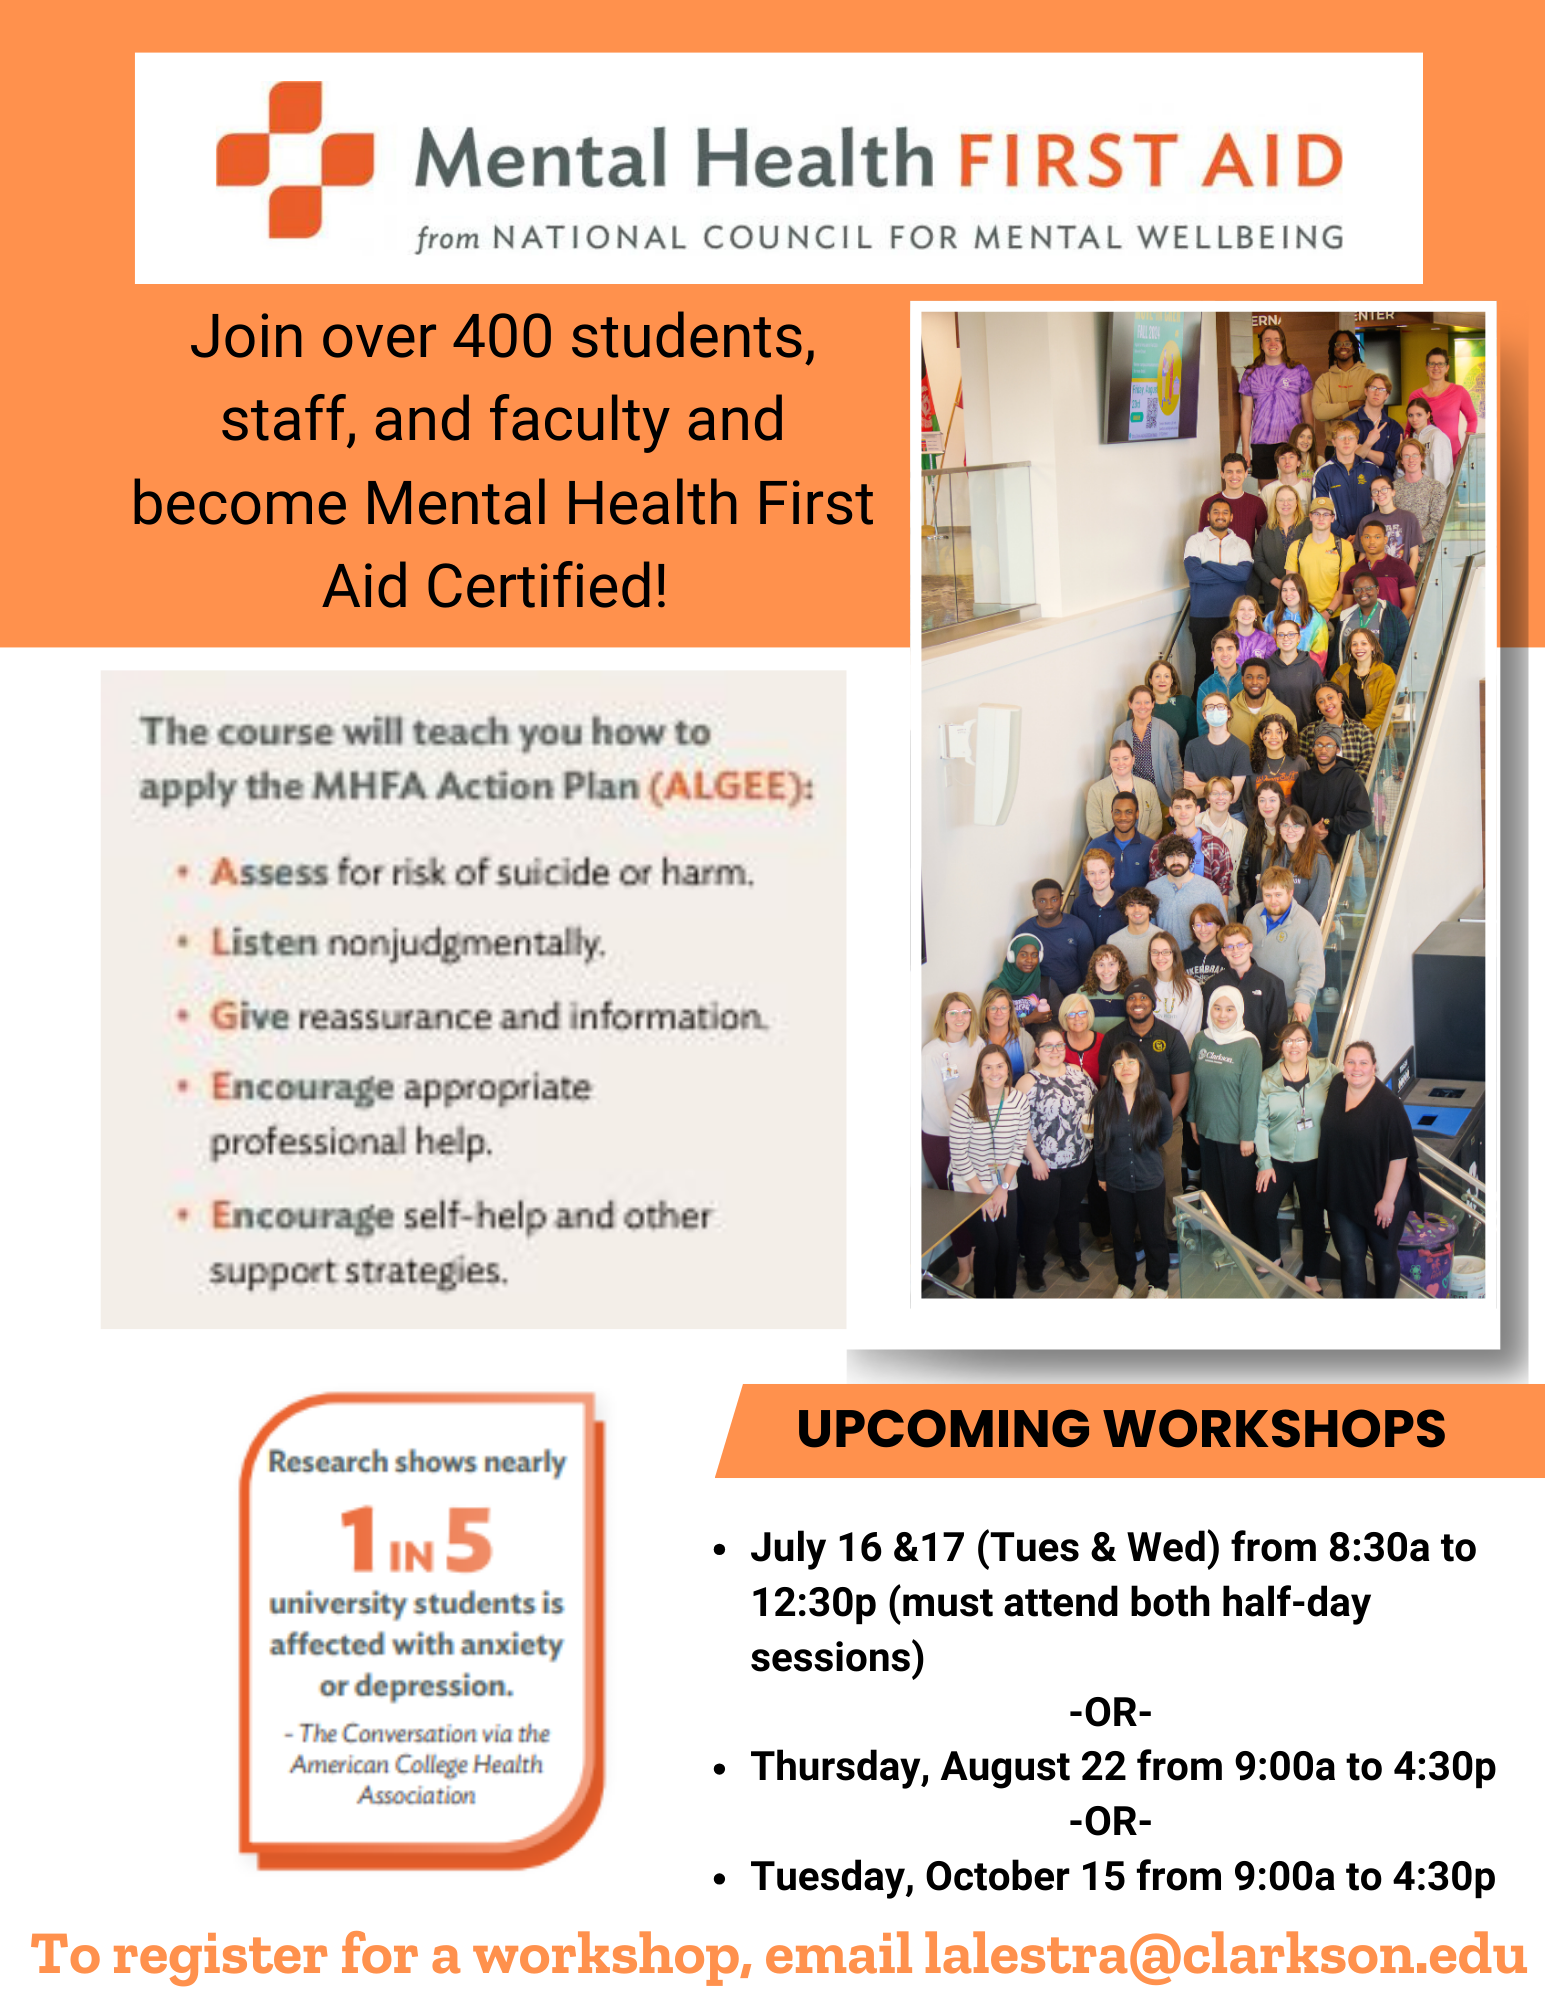 A flier featuring a photo of Clarkson students, staff, and faculty previously certified as Mental Health First Aiders. The flier is titled Mental Health First Aid from the National Council for Mental Wellbeing. The flier states that over 400 students, staff, and faculty have become Mental Health First Aid certified. It states that MHFA helps individuals identify others with mental health concerns with the use of the universal MHFA action plan called ALGEE. The flier lists the three upcoming workshops: July 16th-17th, 8:30 am-12:30 pm (must attend both days), August 22 (9 am-4:30 pm), or October 15 (9 am-4:30 pm). If you are interested in more information or want to register for upcoming workshops, please email lalestra@clarkson.edu.